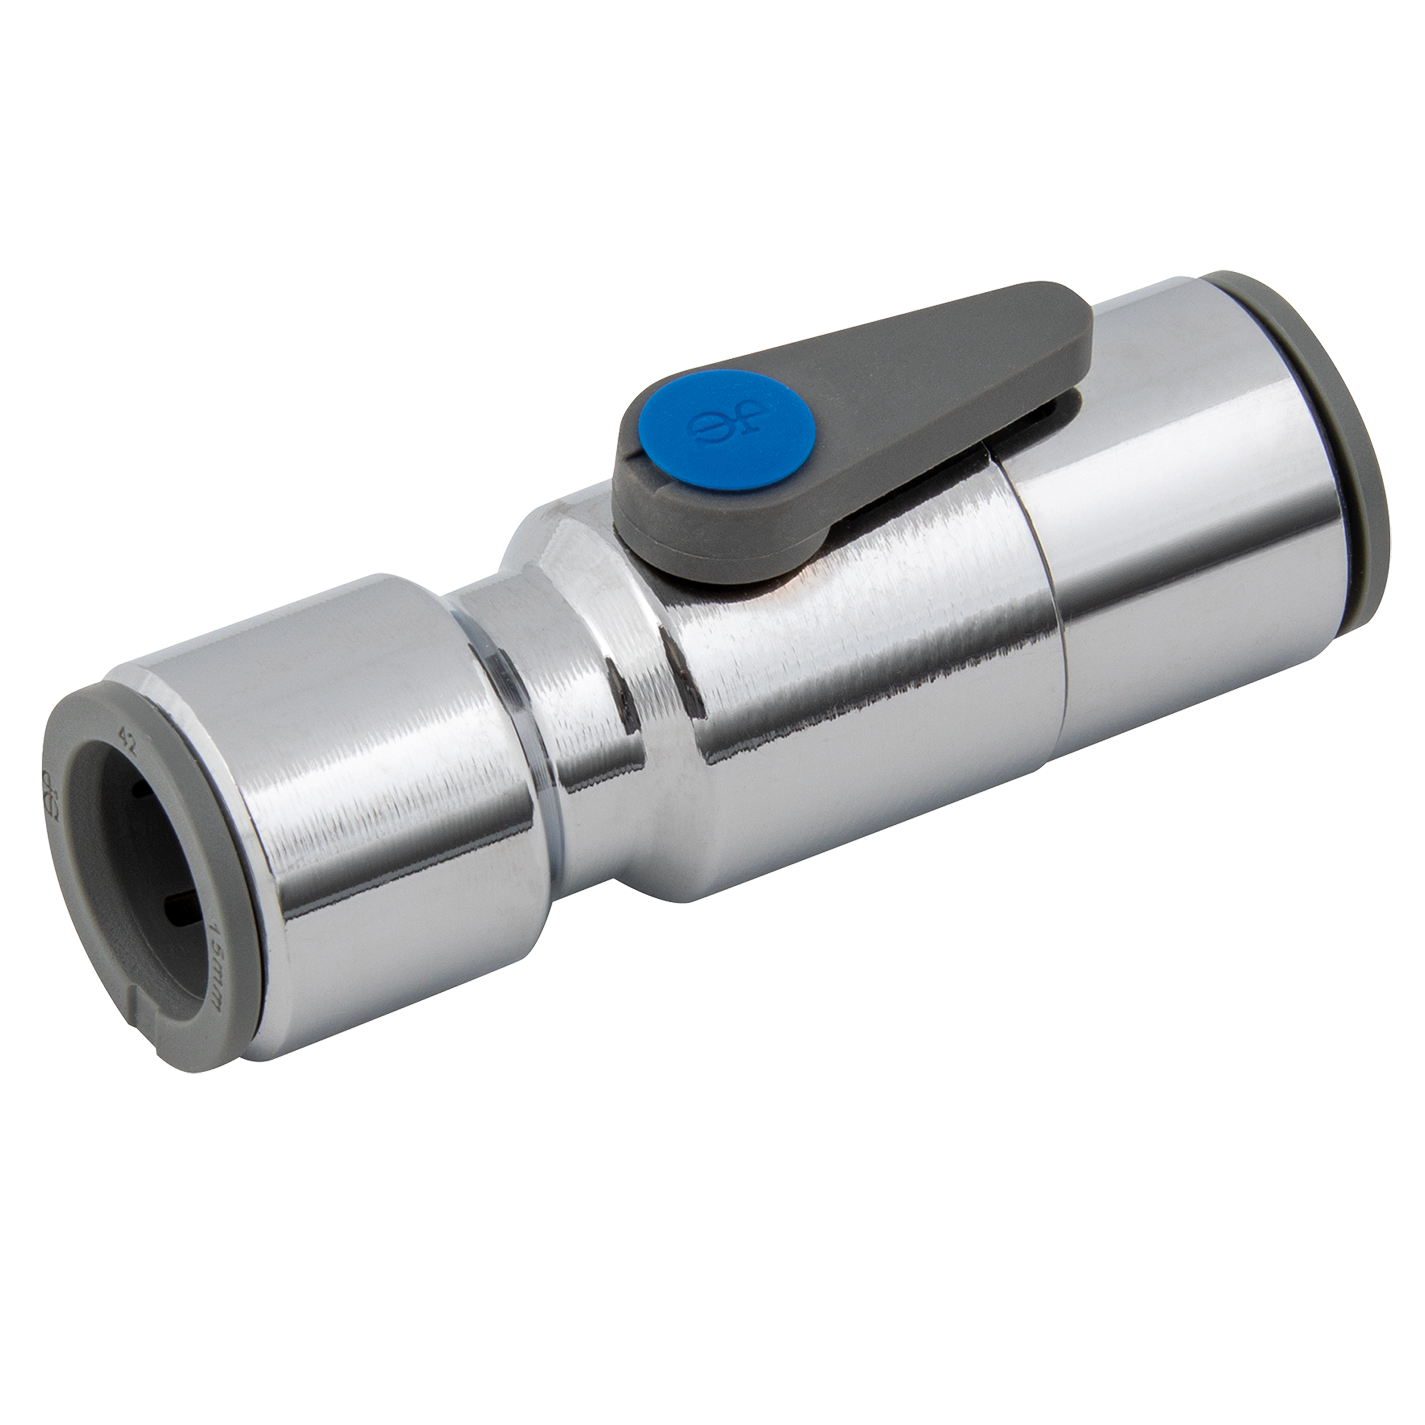 10MM VALVE WITH HANDLE